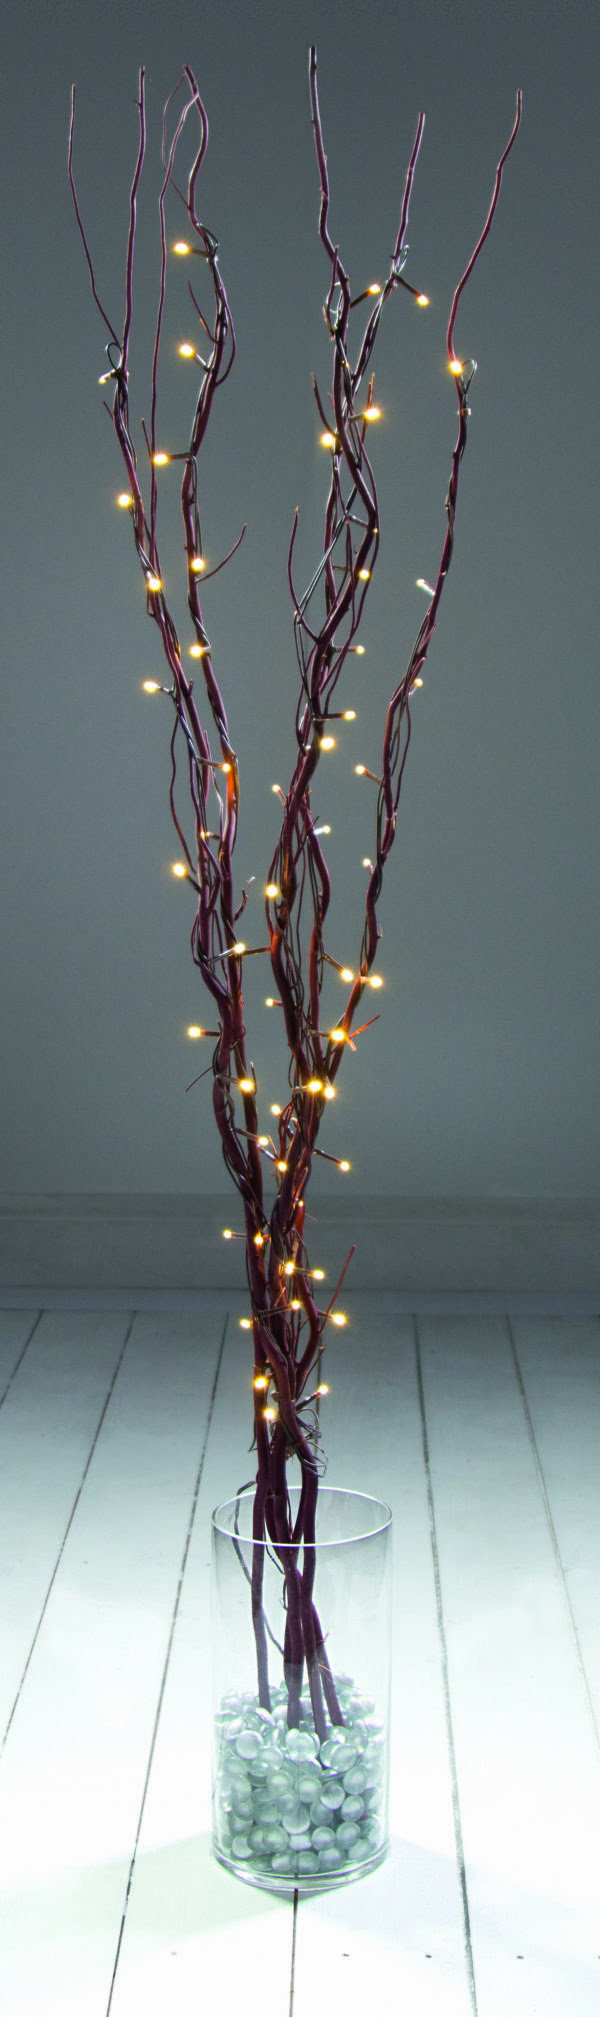 Premier  Light Brown Twig With 80 Warm White Rice Lights – 1.2M